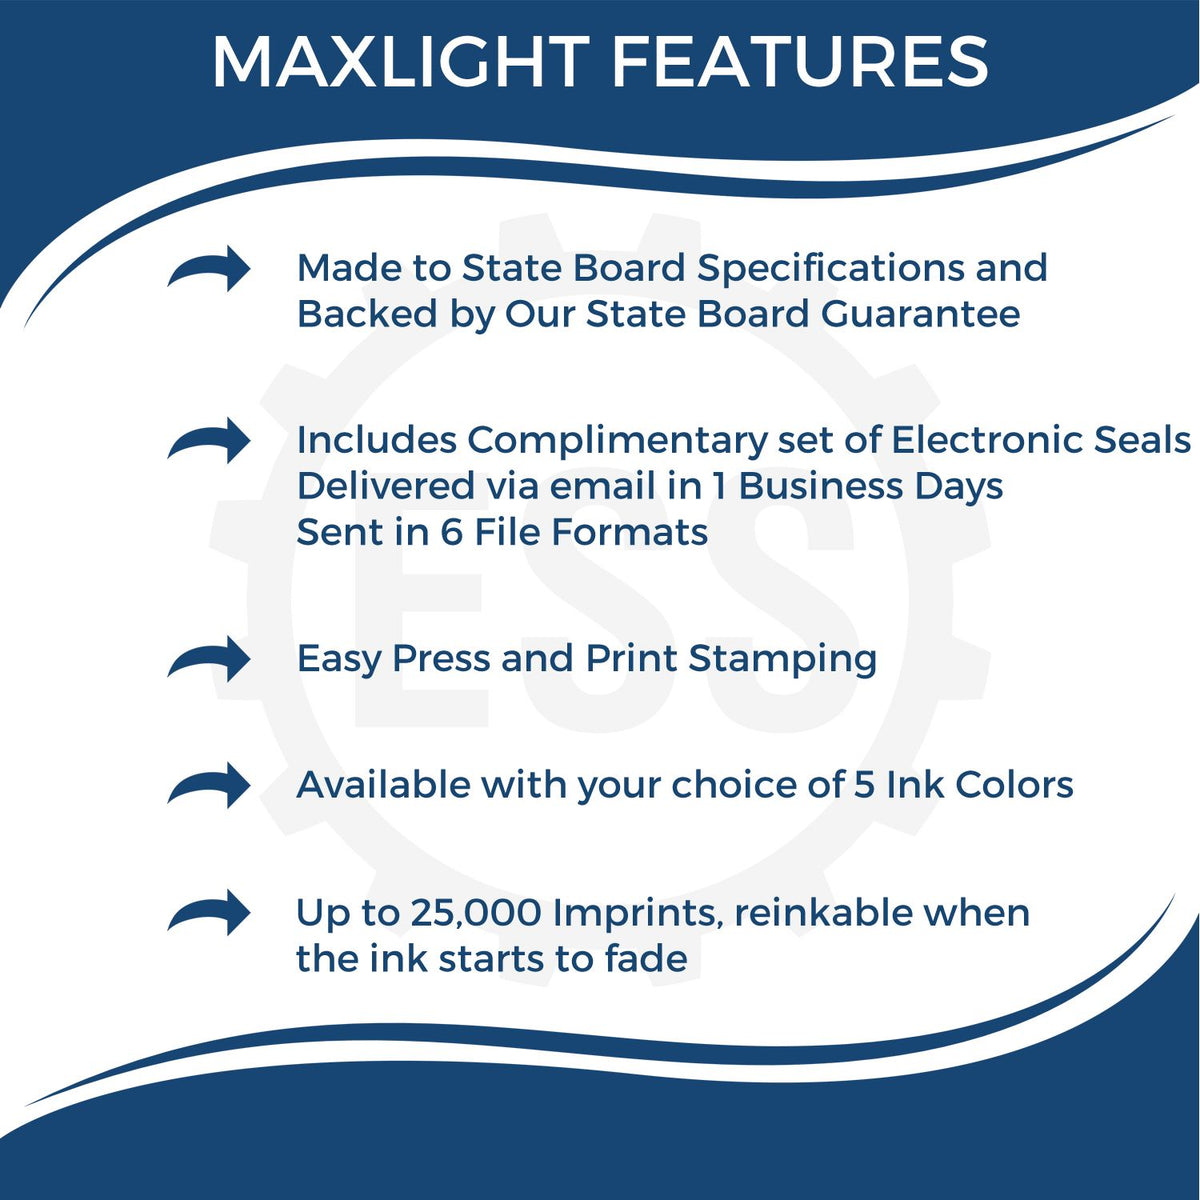 A picture of an infographic highlighting the selling points for the Premium MaxLight Pre-Inked Louisiana Engineering Stamp